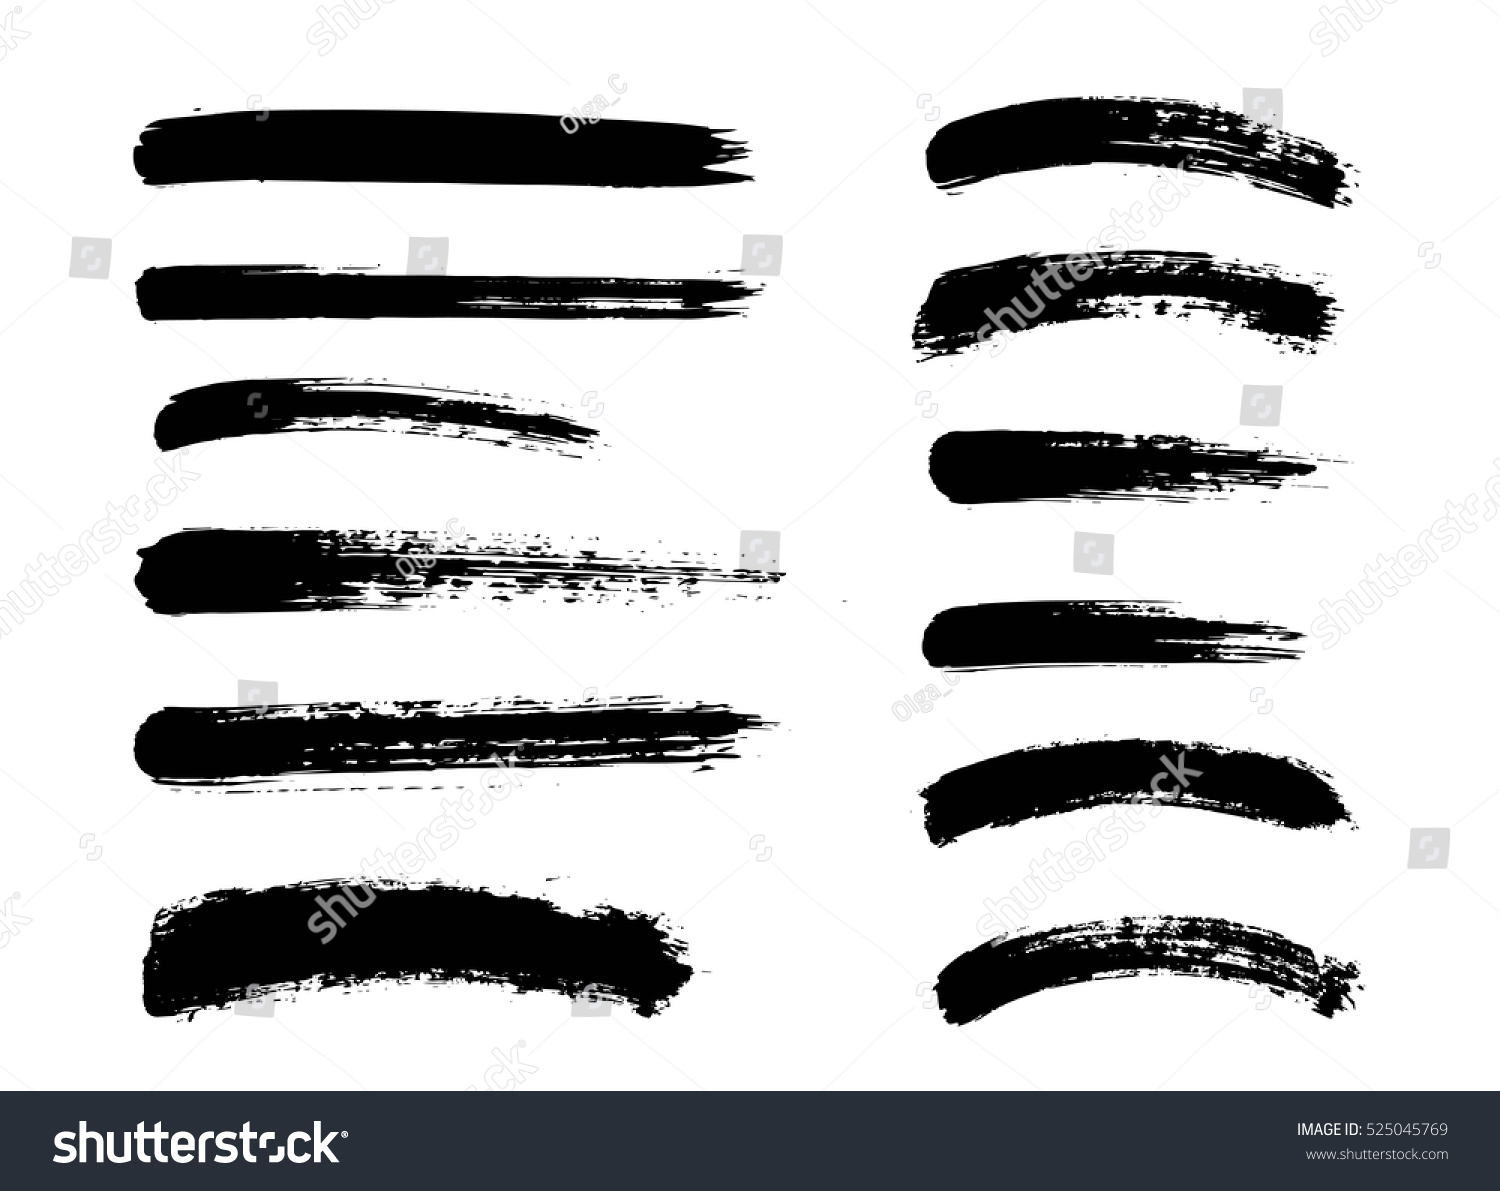 Set of black paint, ink brush strokes, brushes, lines. Dirty artistic design elements #525045769